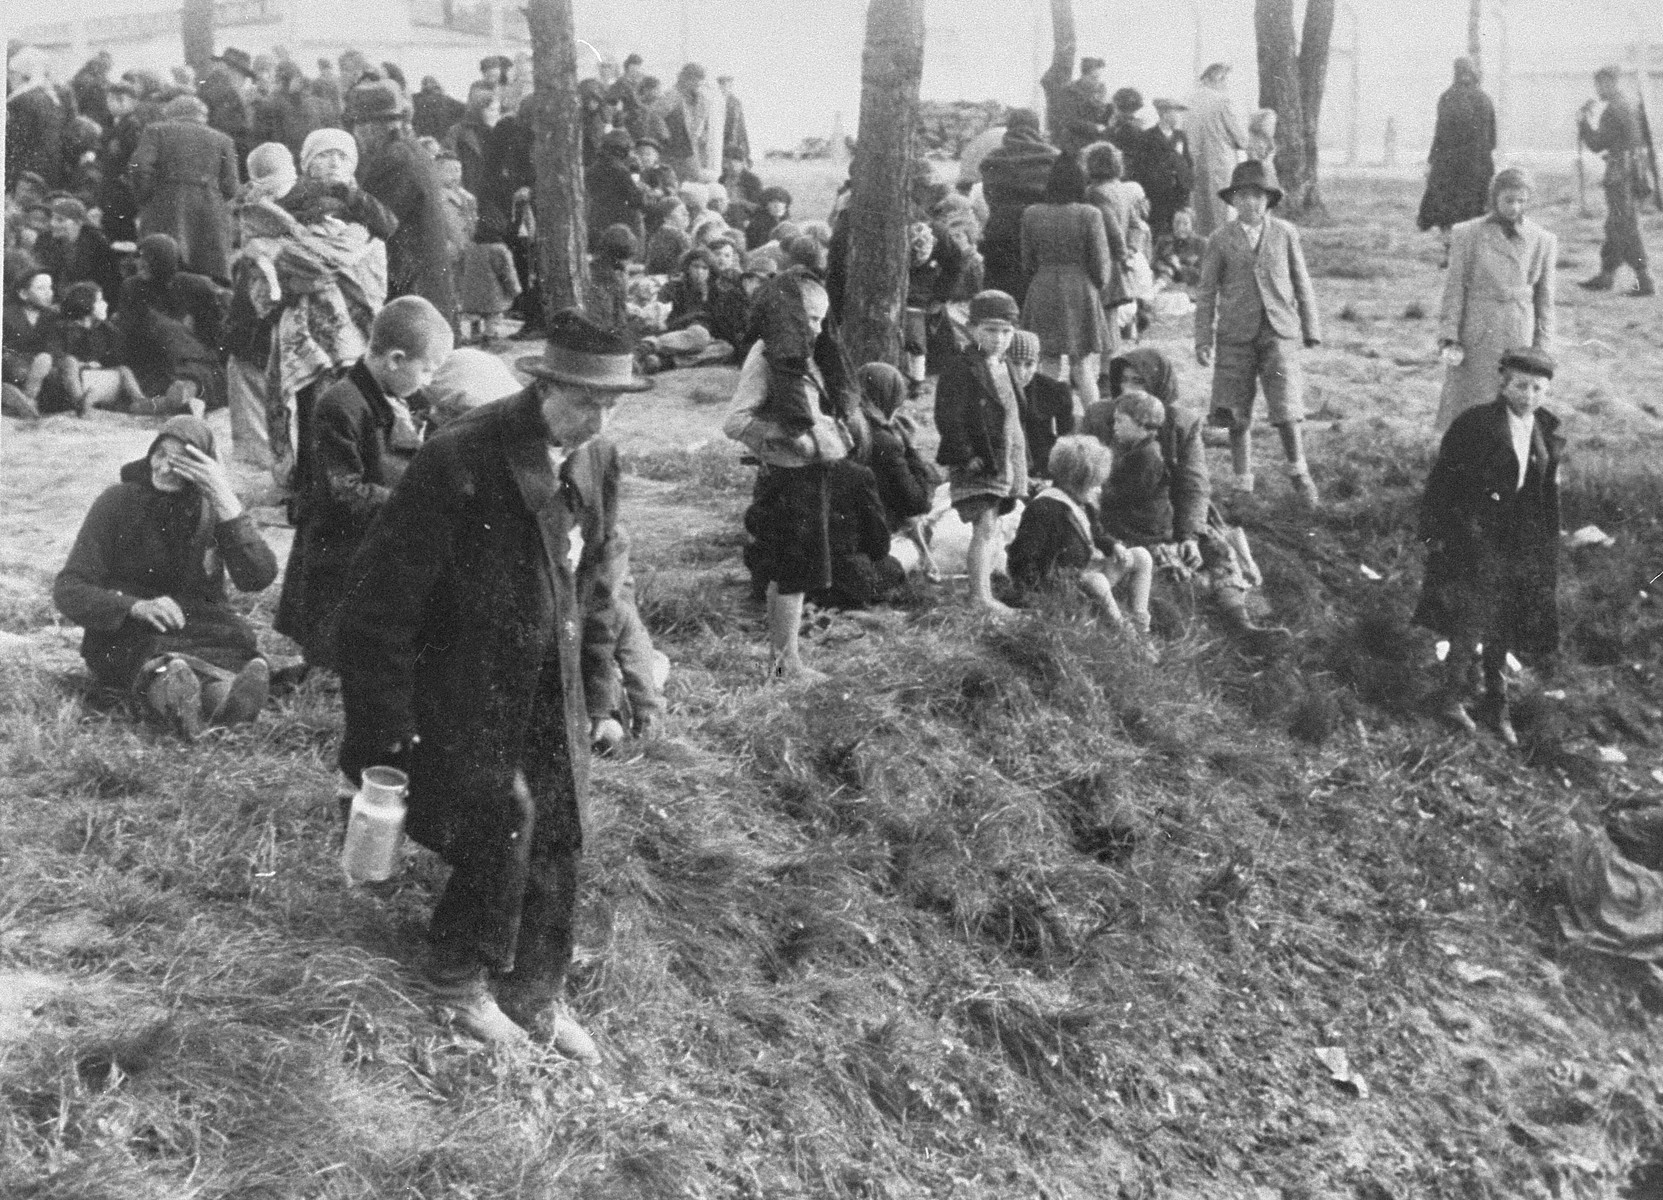 Jews from Subcarpathian Rus who have been selected for death at Auschwitz-Birkenau, wait in a clearing near a grove of trees before being led to the gas chambers.